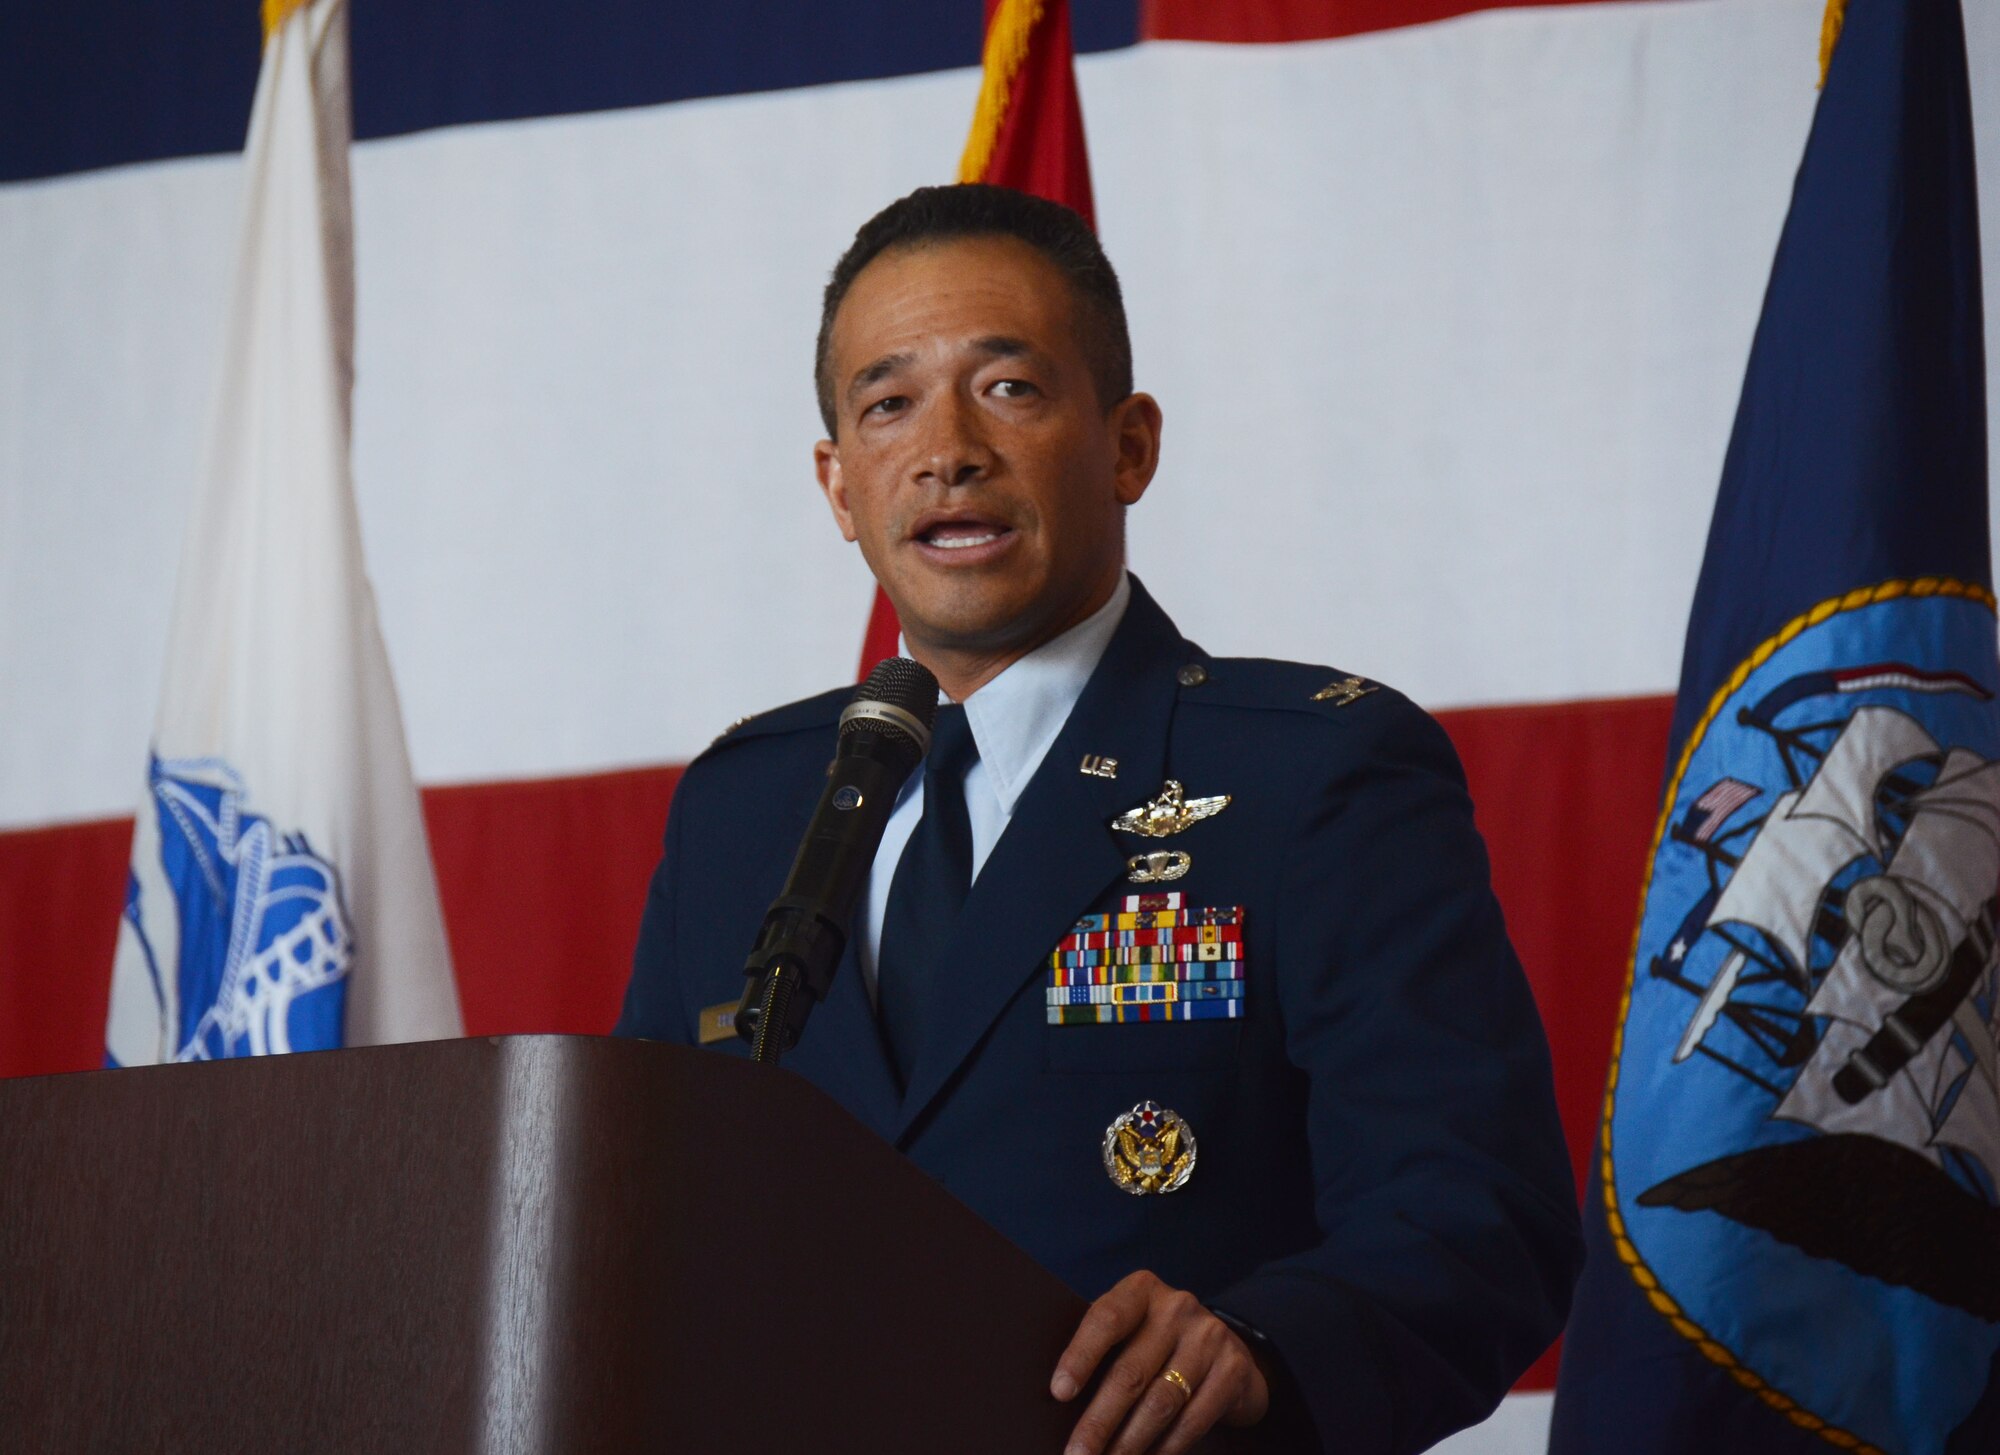 Col. Arthur Primas, U.S. Air Force Academy director of admissions, speaks to attendees at this year's Academy Day, held at Dobbins Air Reserve Base, Ga. April 28, 2018. He discussed the benefits of attending the Air Force Academy to an audience of nearly 1,000. (U.S. Air Force photo/Don Peek)